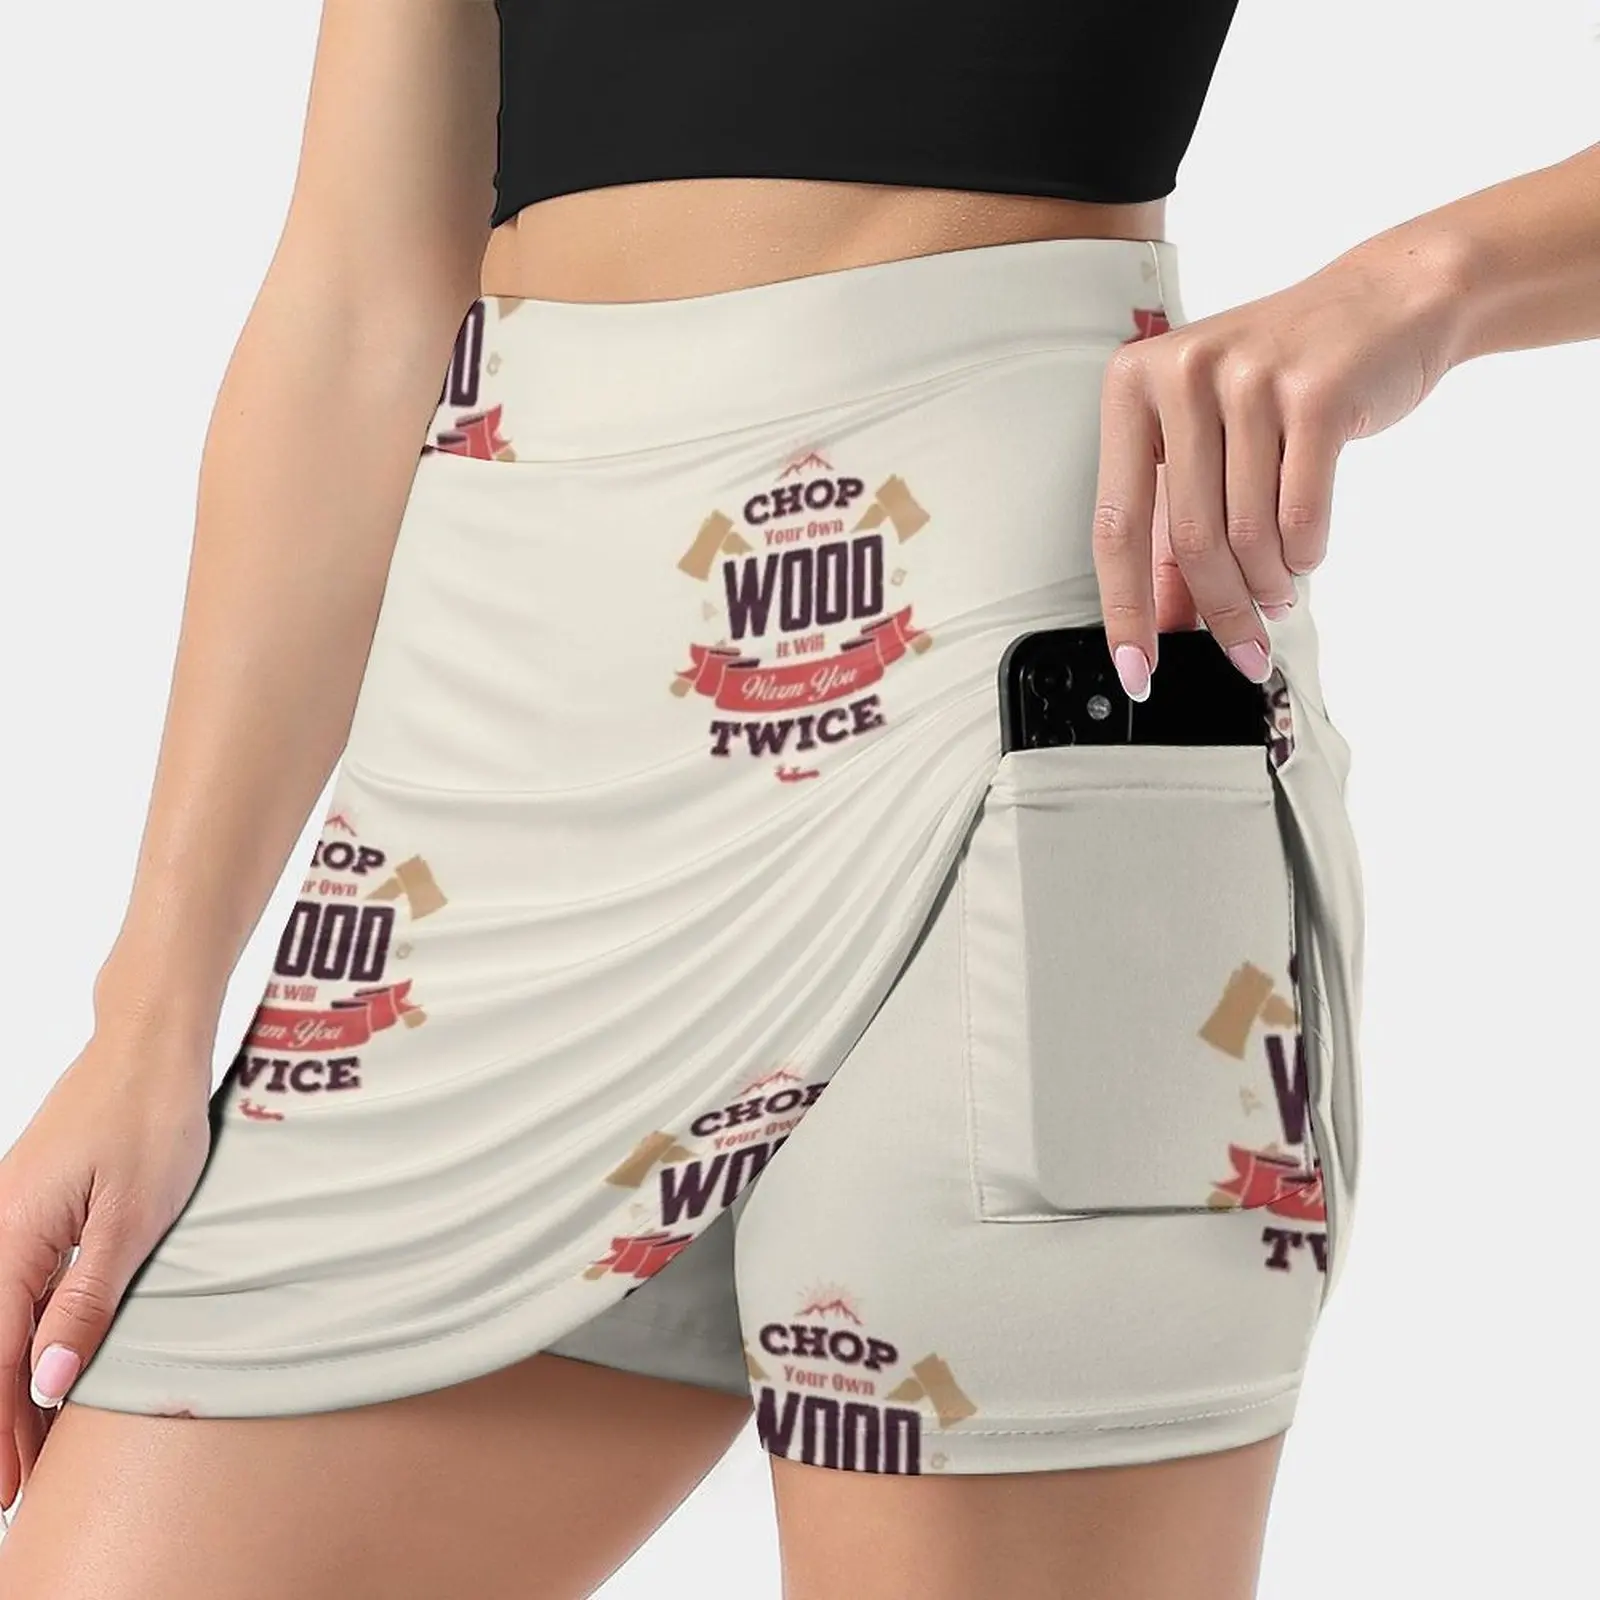 

Chop Your Own Wood Women's skirt With Hide Pocket Tennis Skirt Golf Skirts Badminton Skirts Running skirts Typography Quote